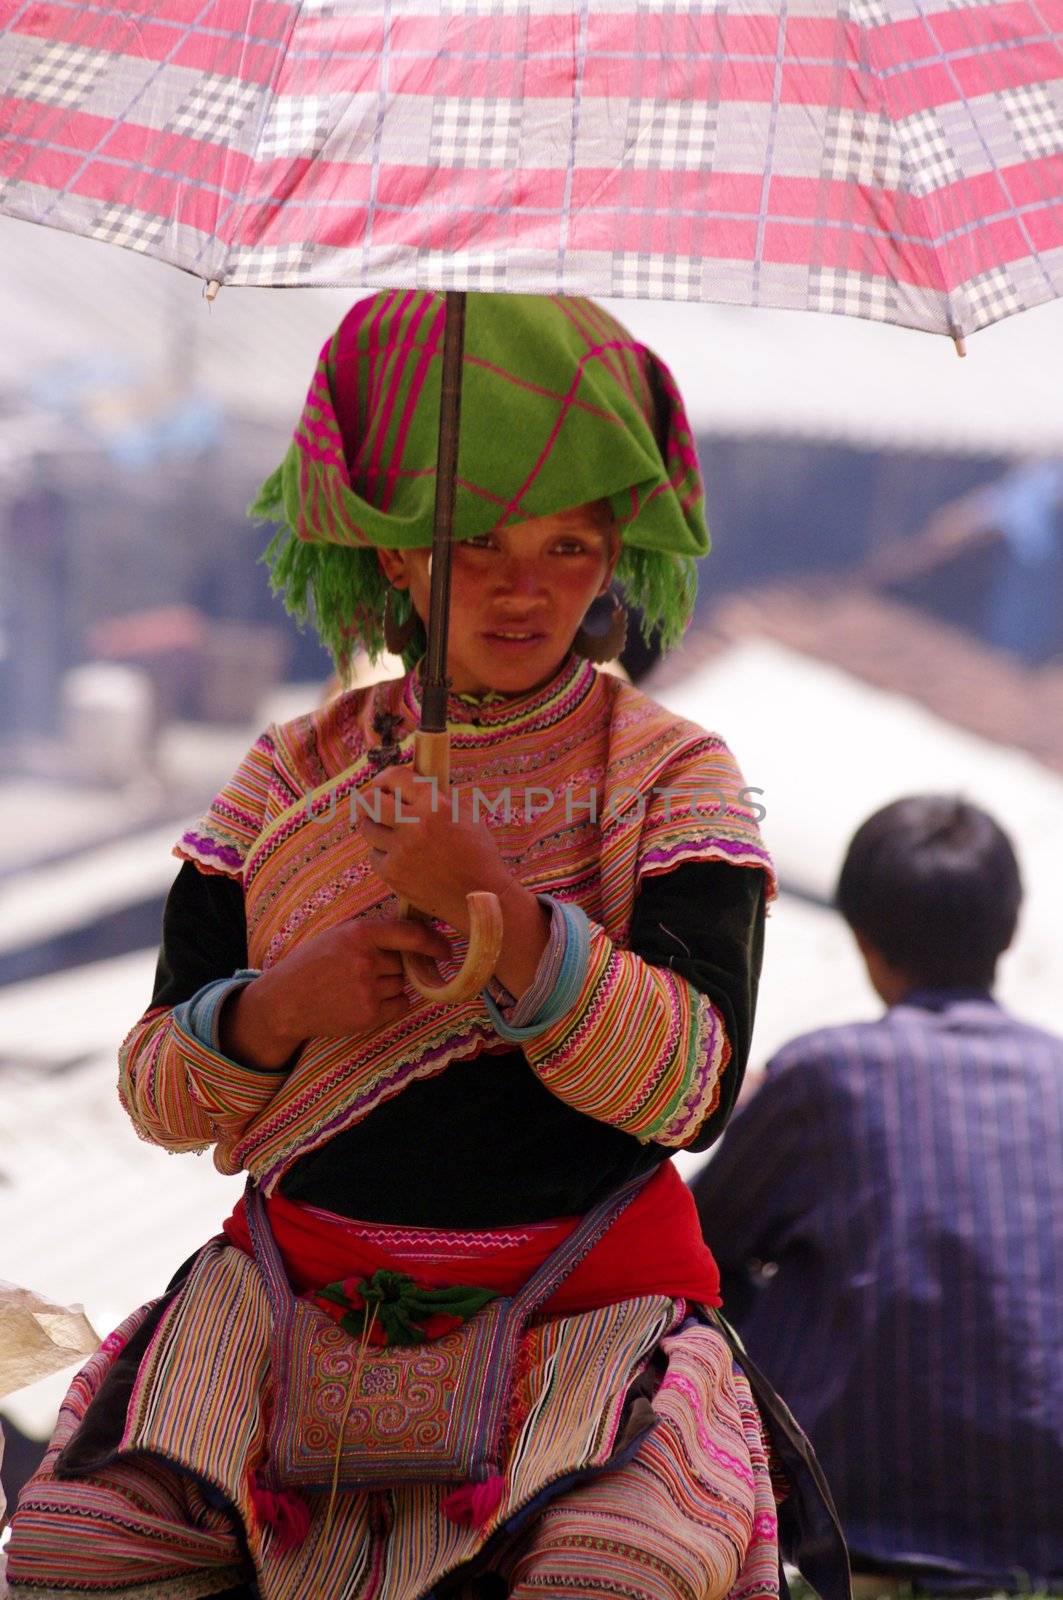 Flowered Hmong woman by Duroc